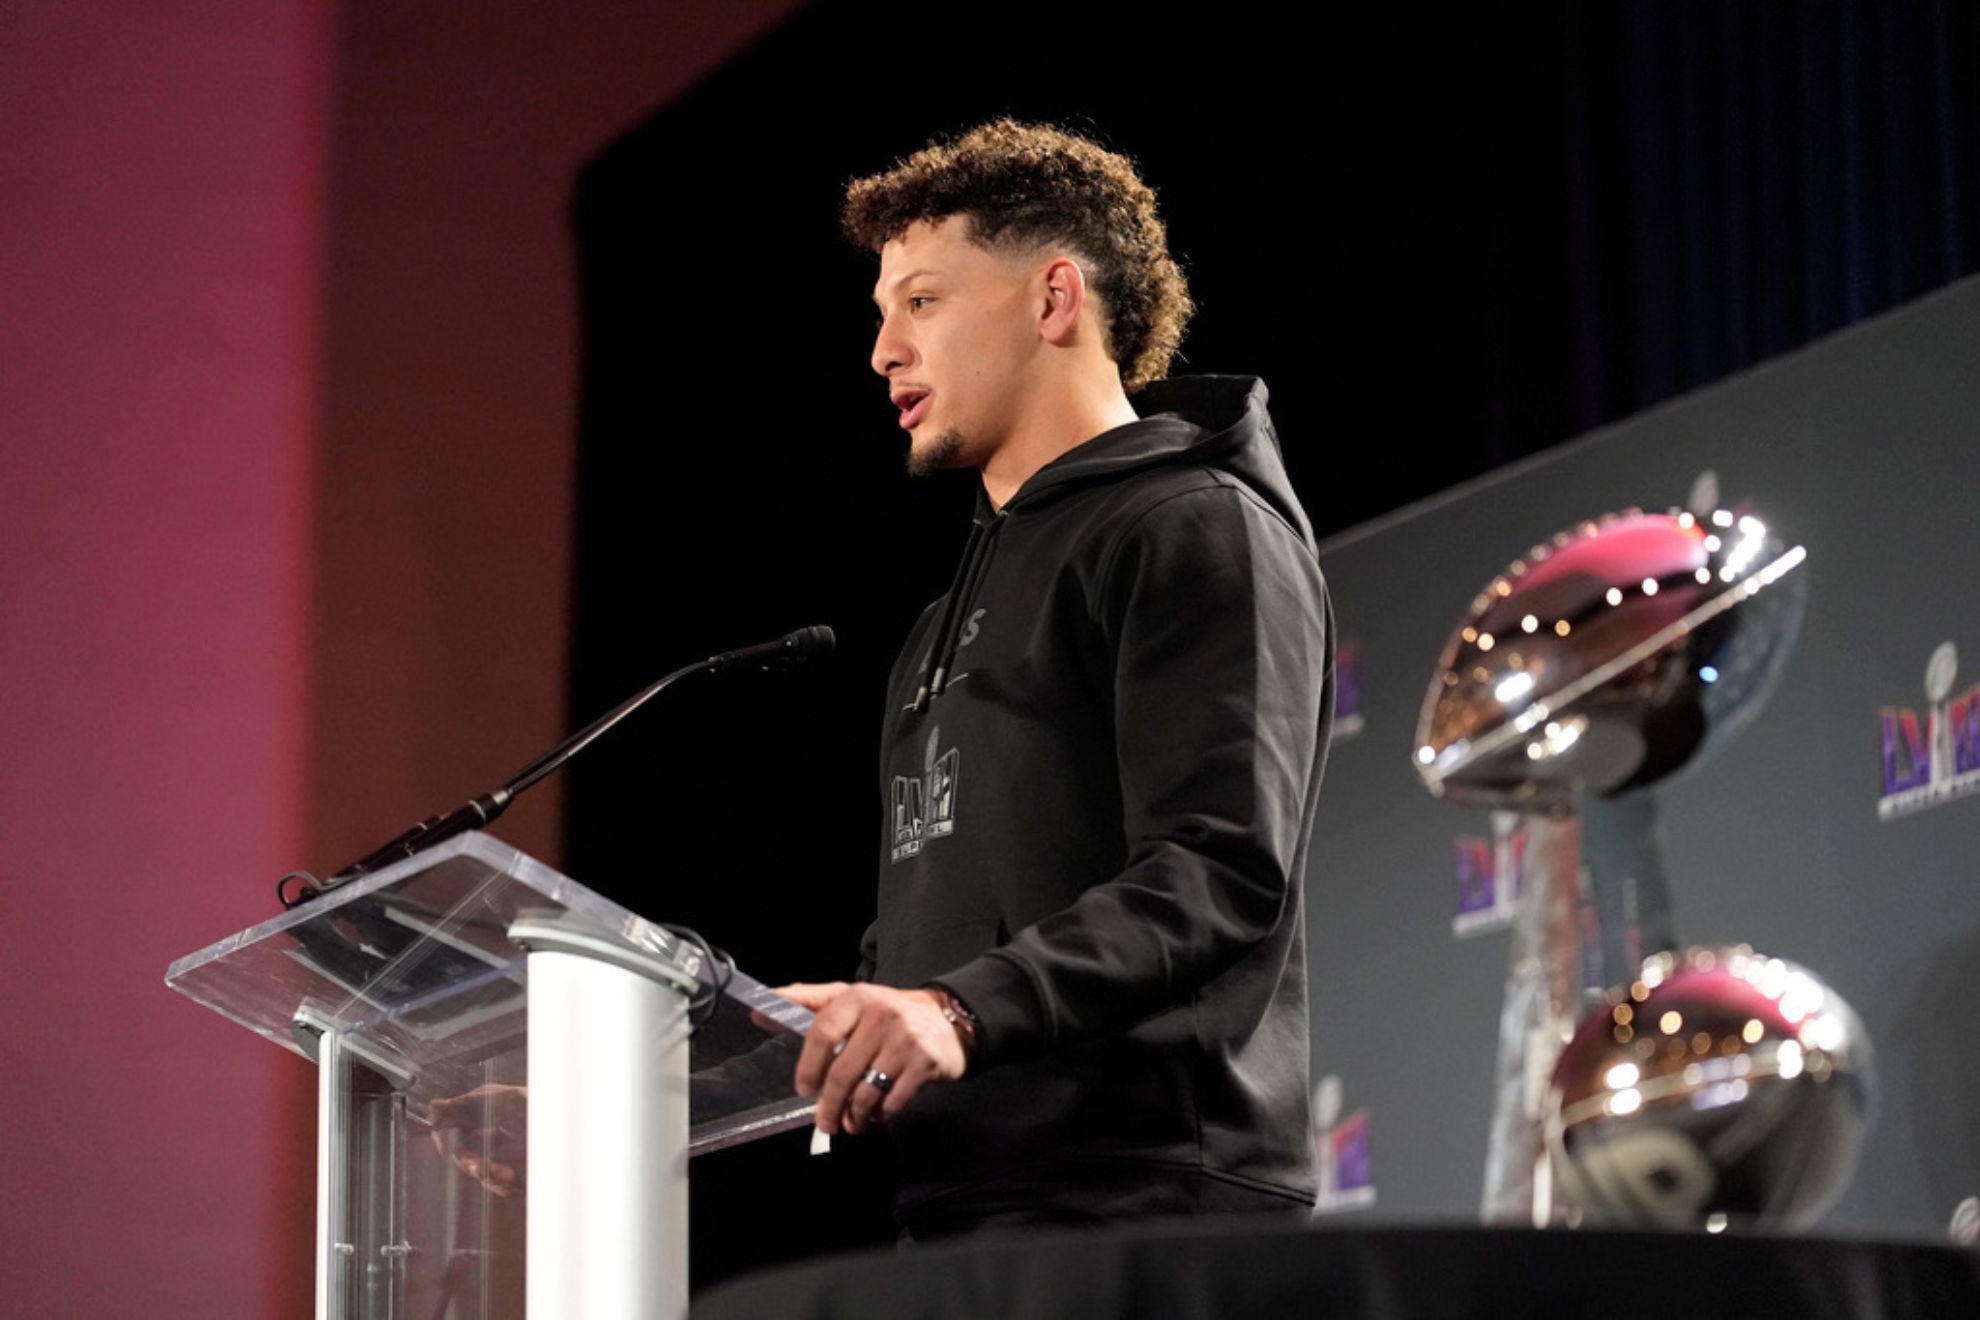 Mahomes prefers to speak freely in public rather than read